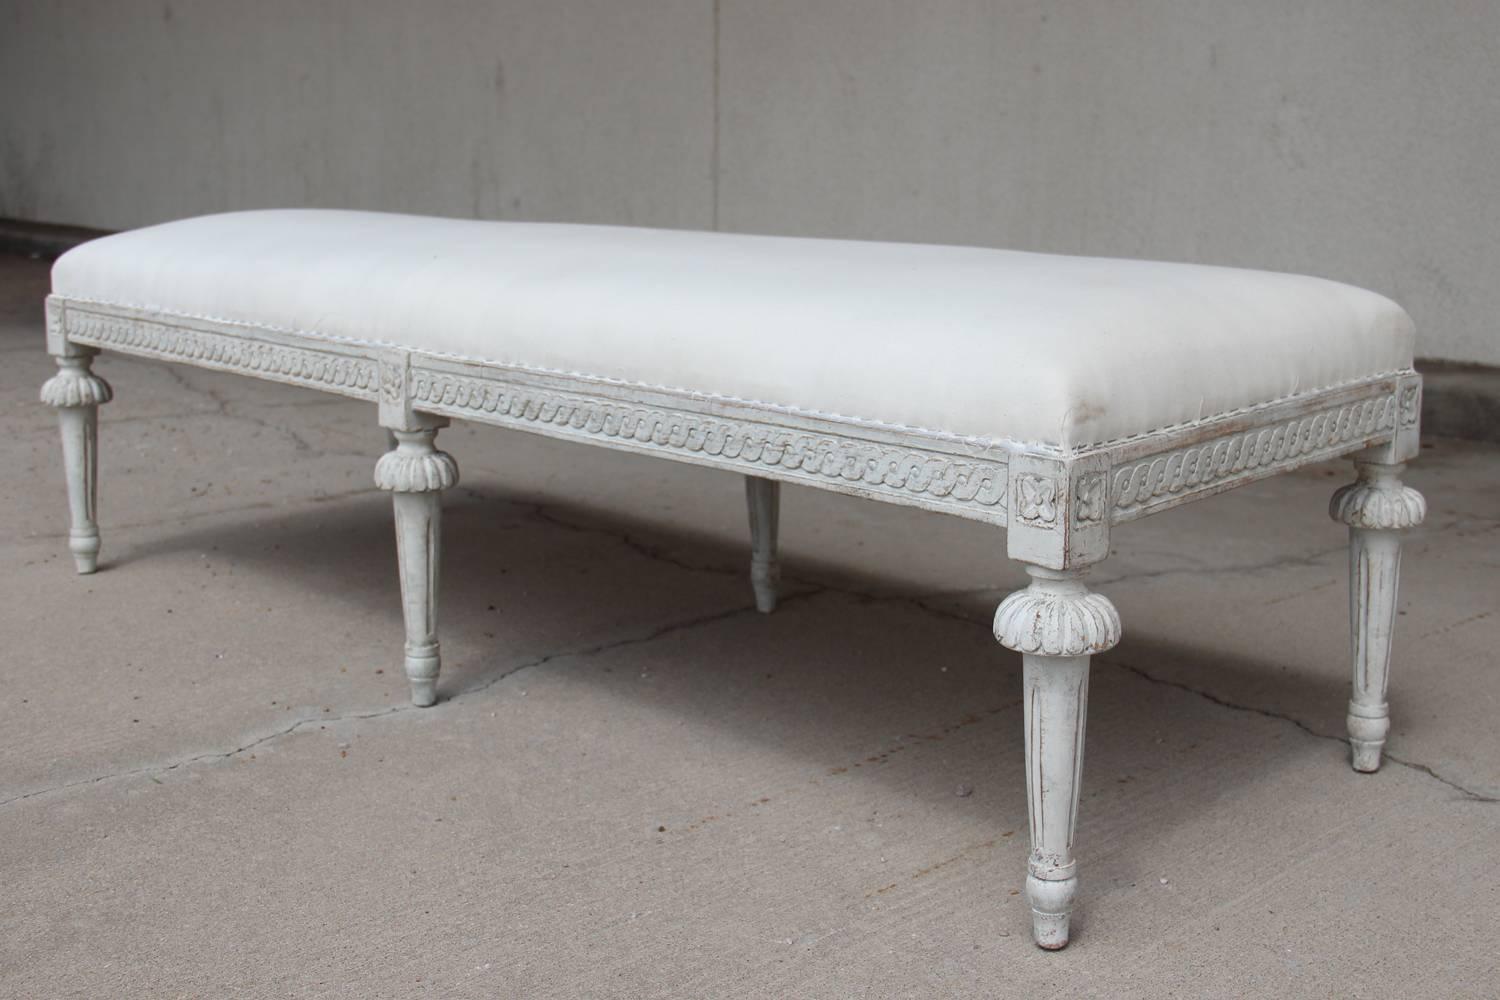 A richly carved 19th century Swedish painted long bench from the Gustavian period with carved guilloche pattern on the seat frame and carved rosettes above fluted, round caps, ending in tapered and fluted legs.  Chalky Gustavian white paint finish.